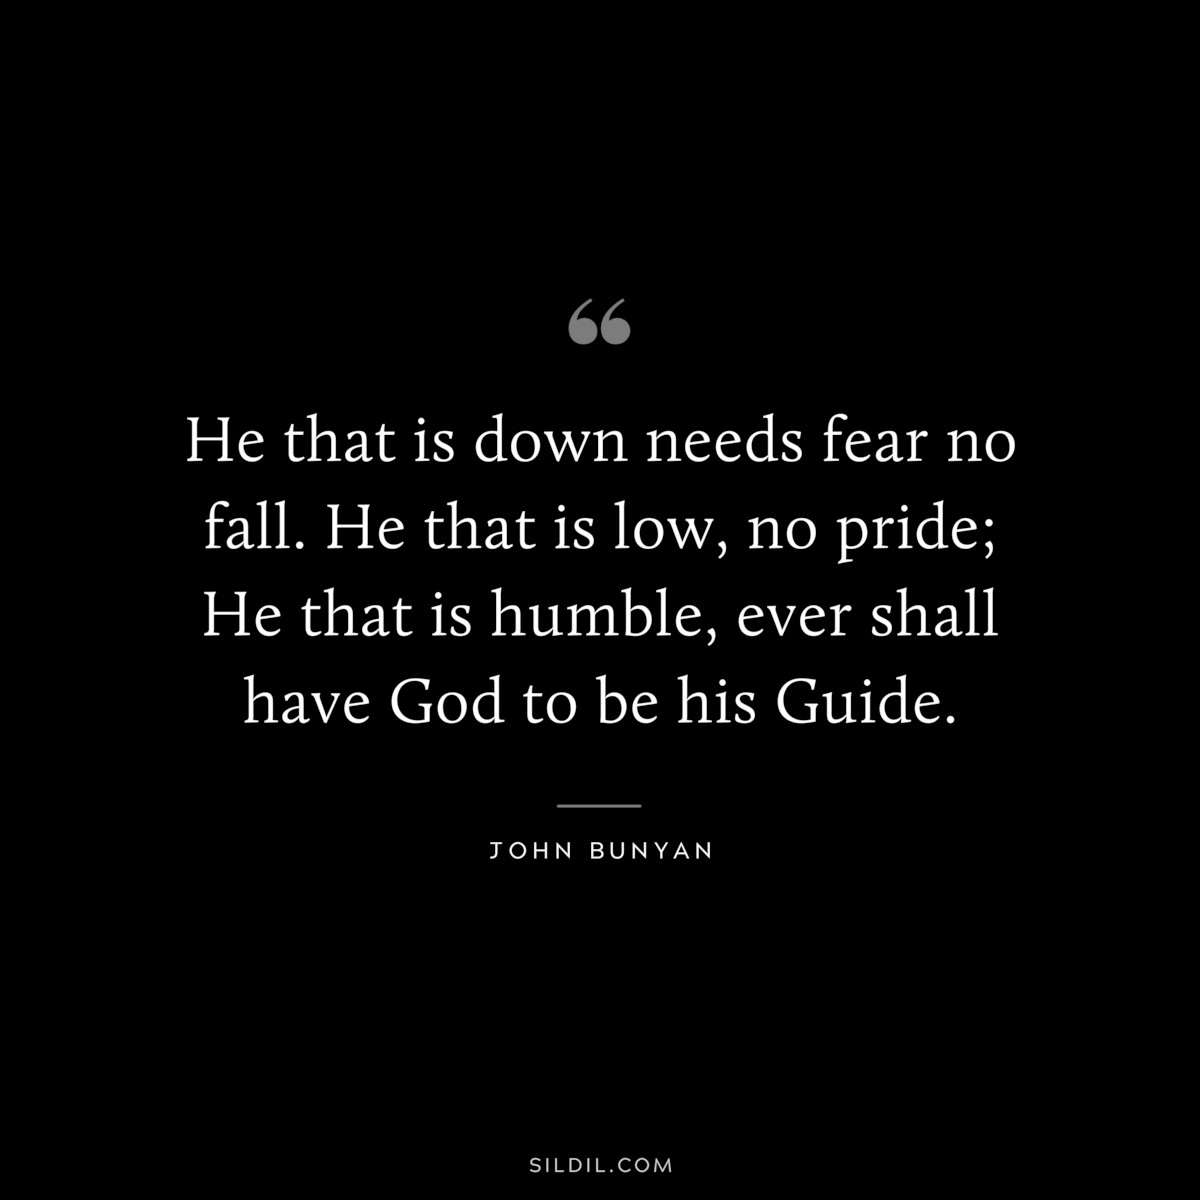 He that is down needs fear no fall. He that is low, no pride; He that is humble, ever shall have God to be his Guide. ― John Bunyan